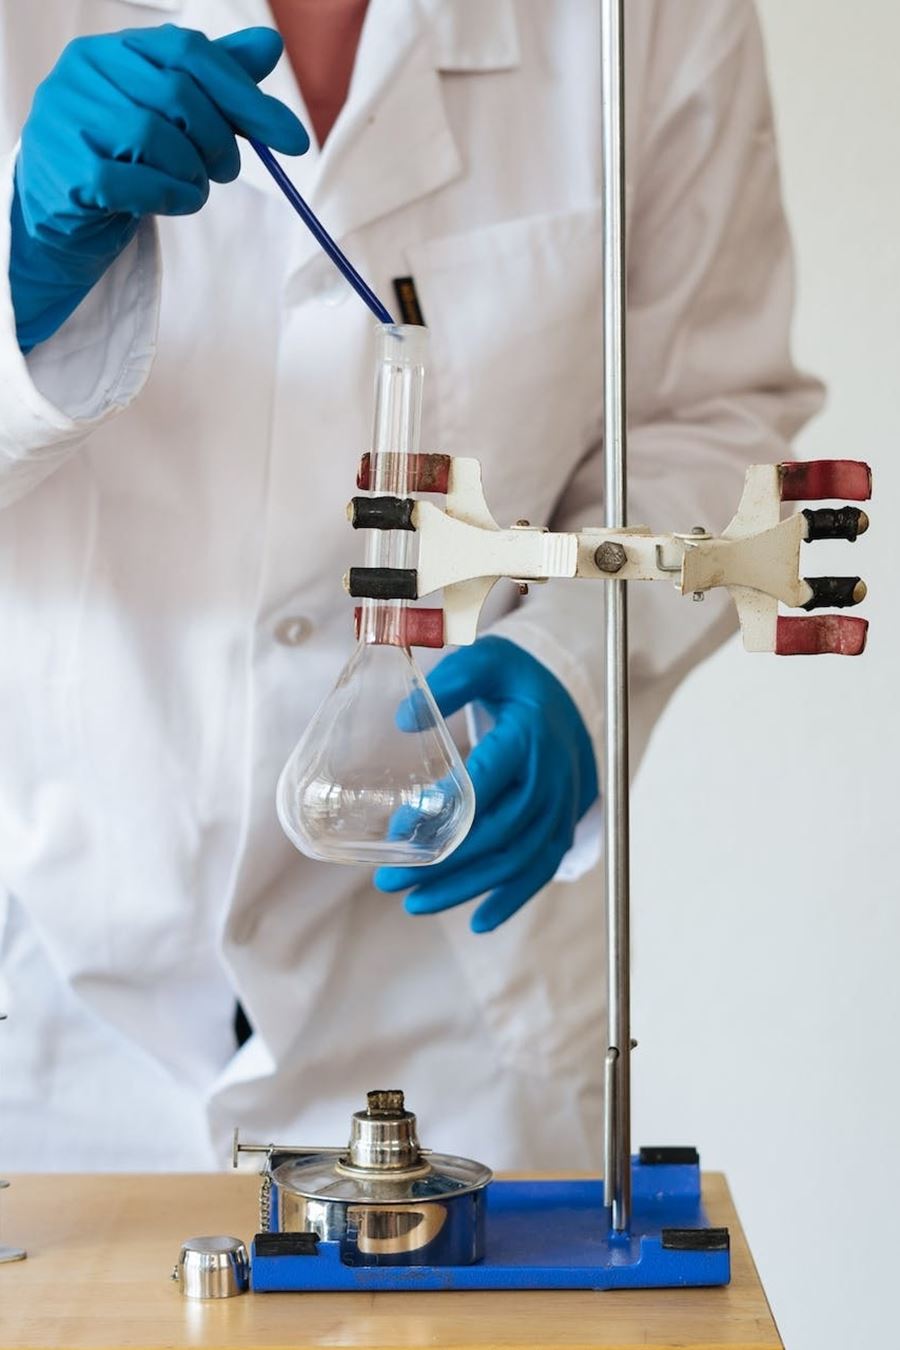 Lab technician performing dripping technique